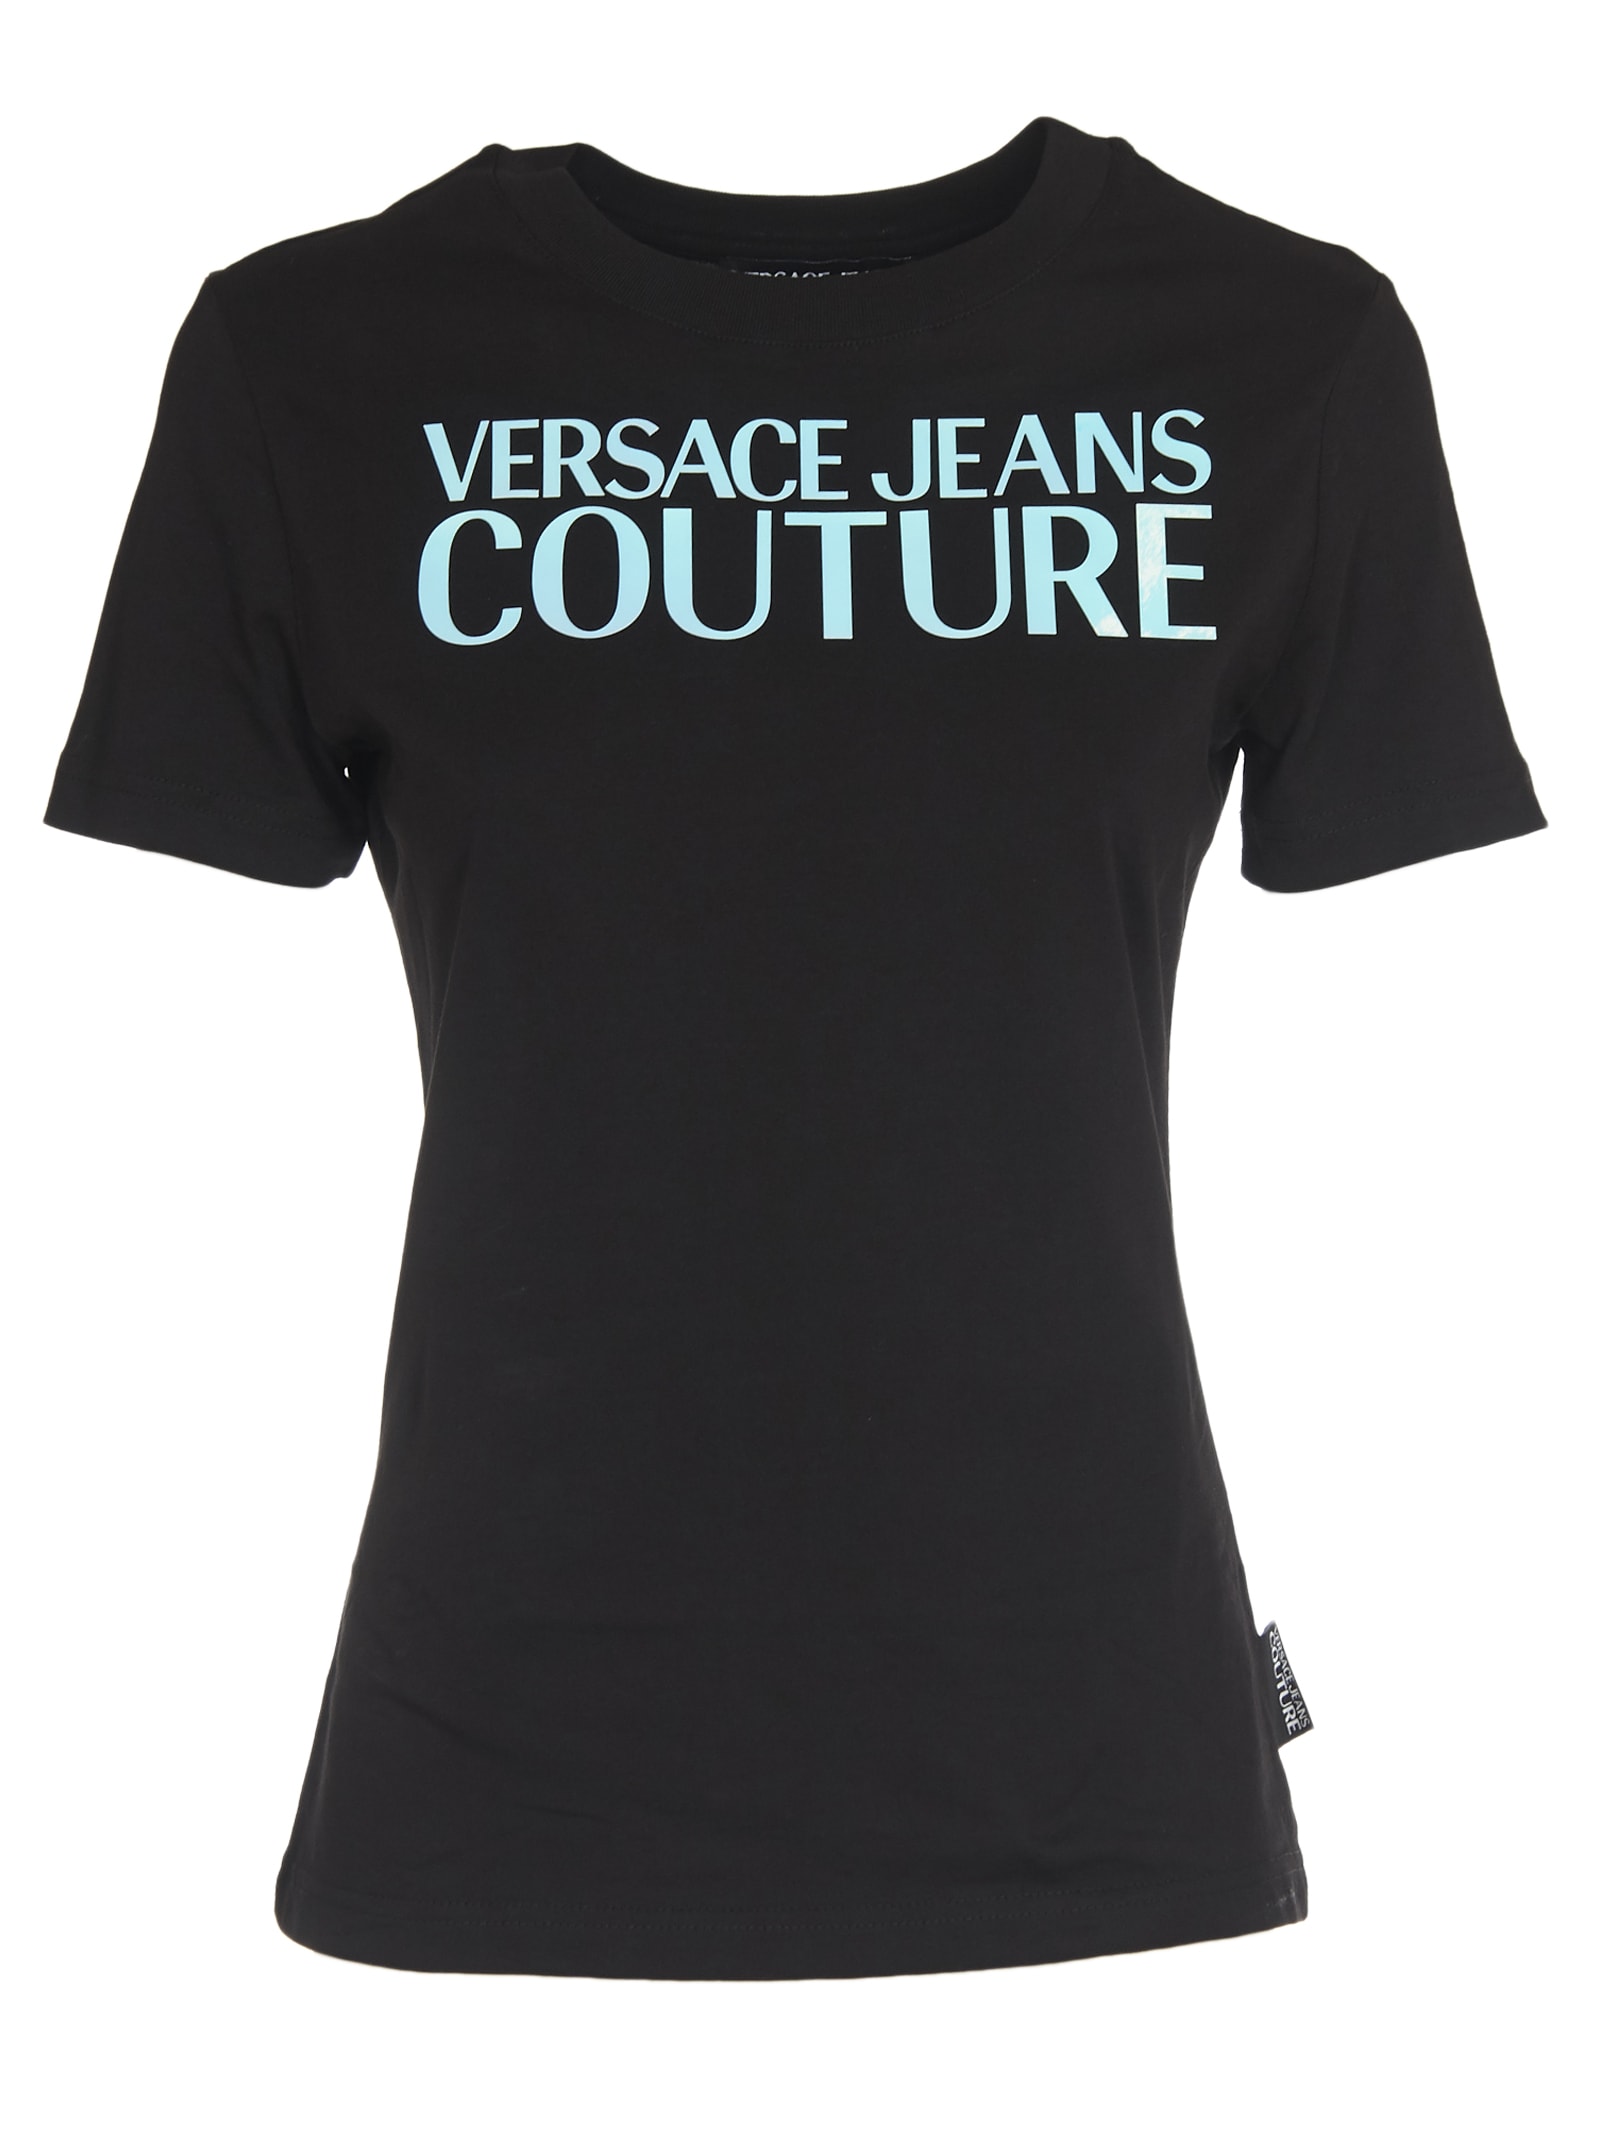 Versace Jeans Couture Black T-shirt With Light Blue Logo